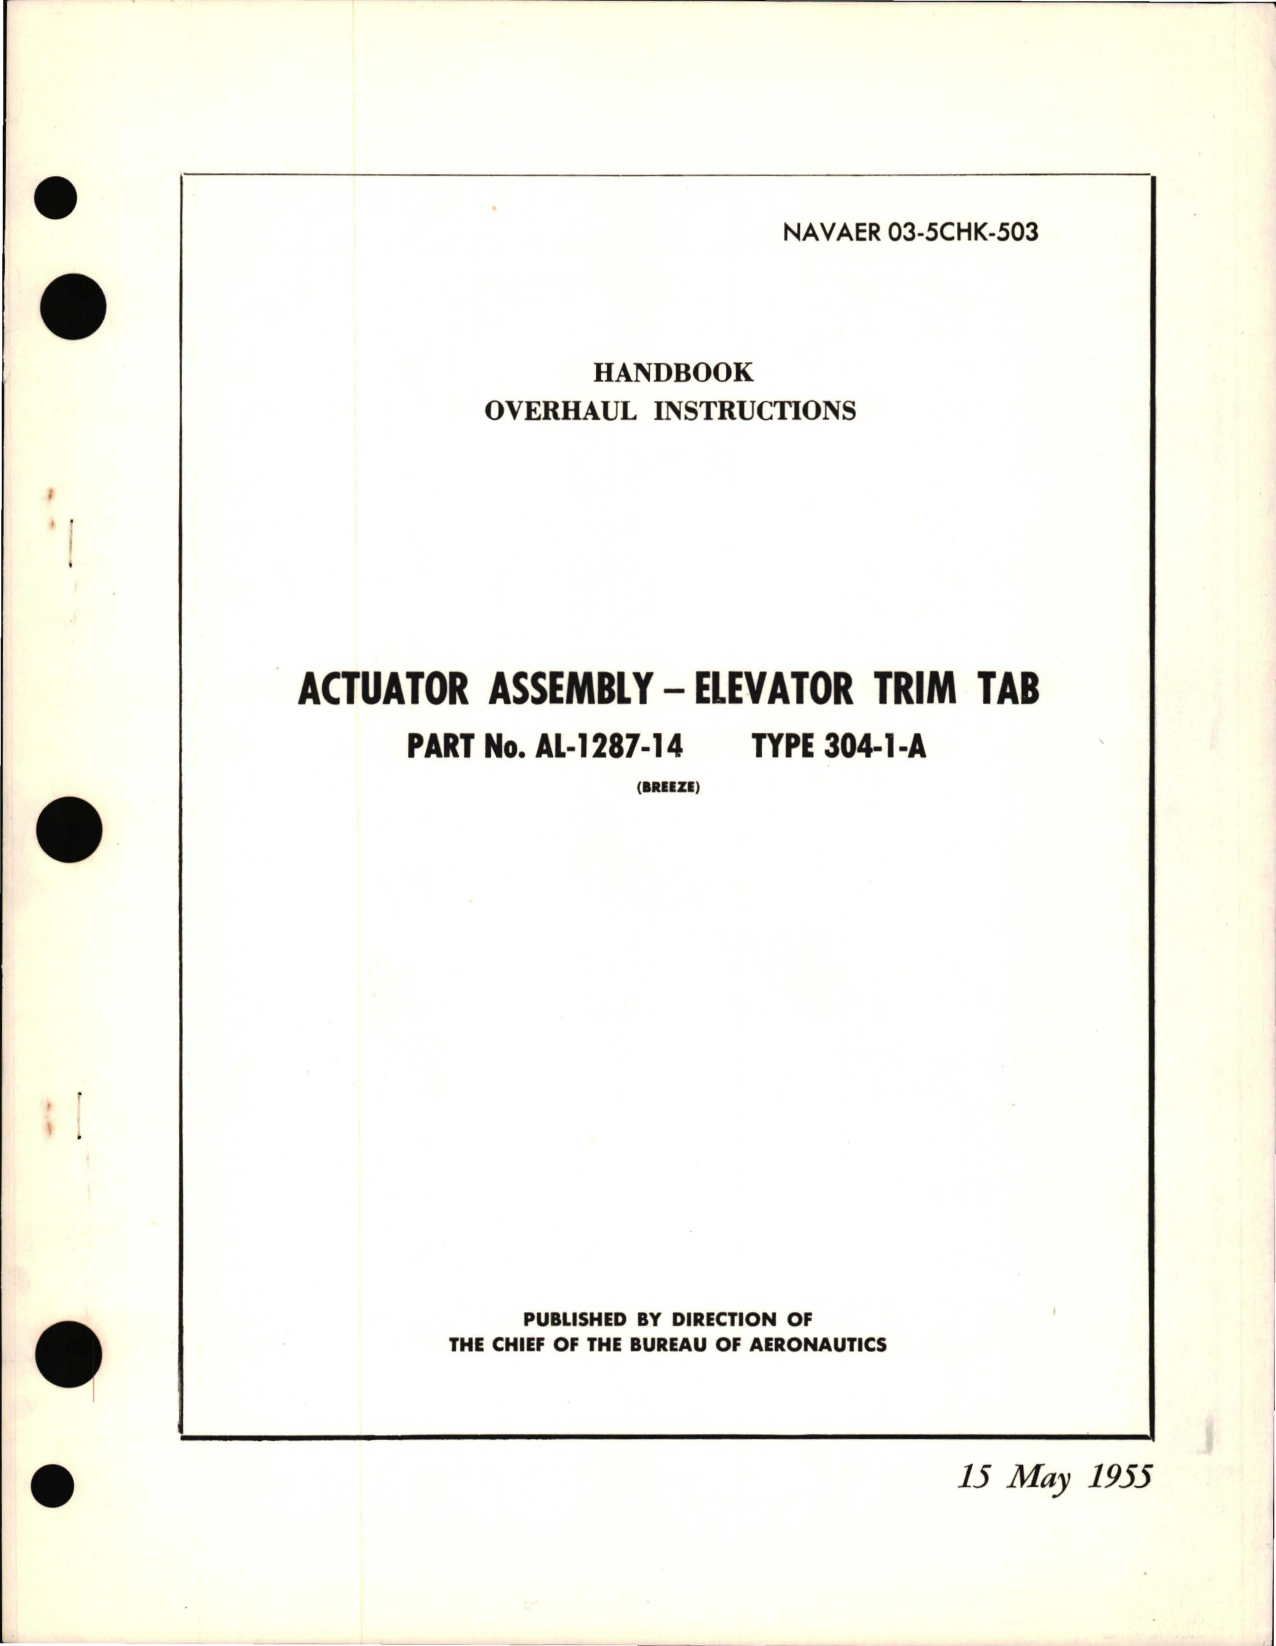 Sample page 1 from AirCorps Library document: Overhaul Instructions for Actuator Assy - Elevator Trim Tab Part No. AL-1287-14, Type 304-1-A